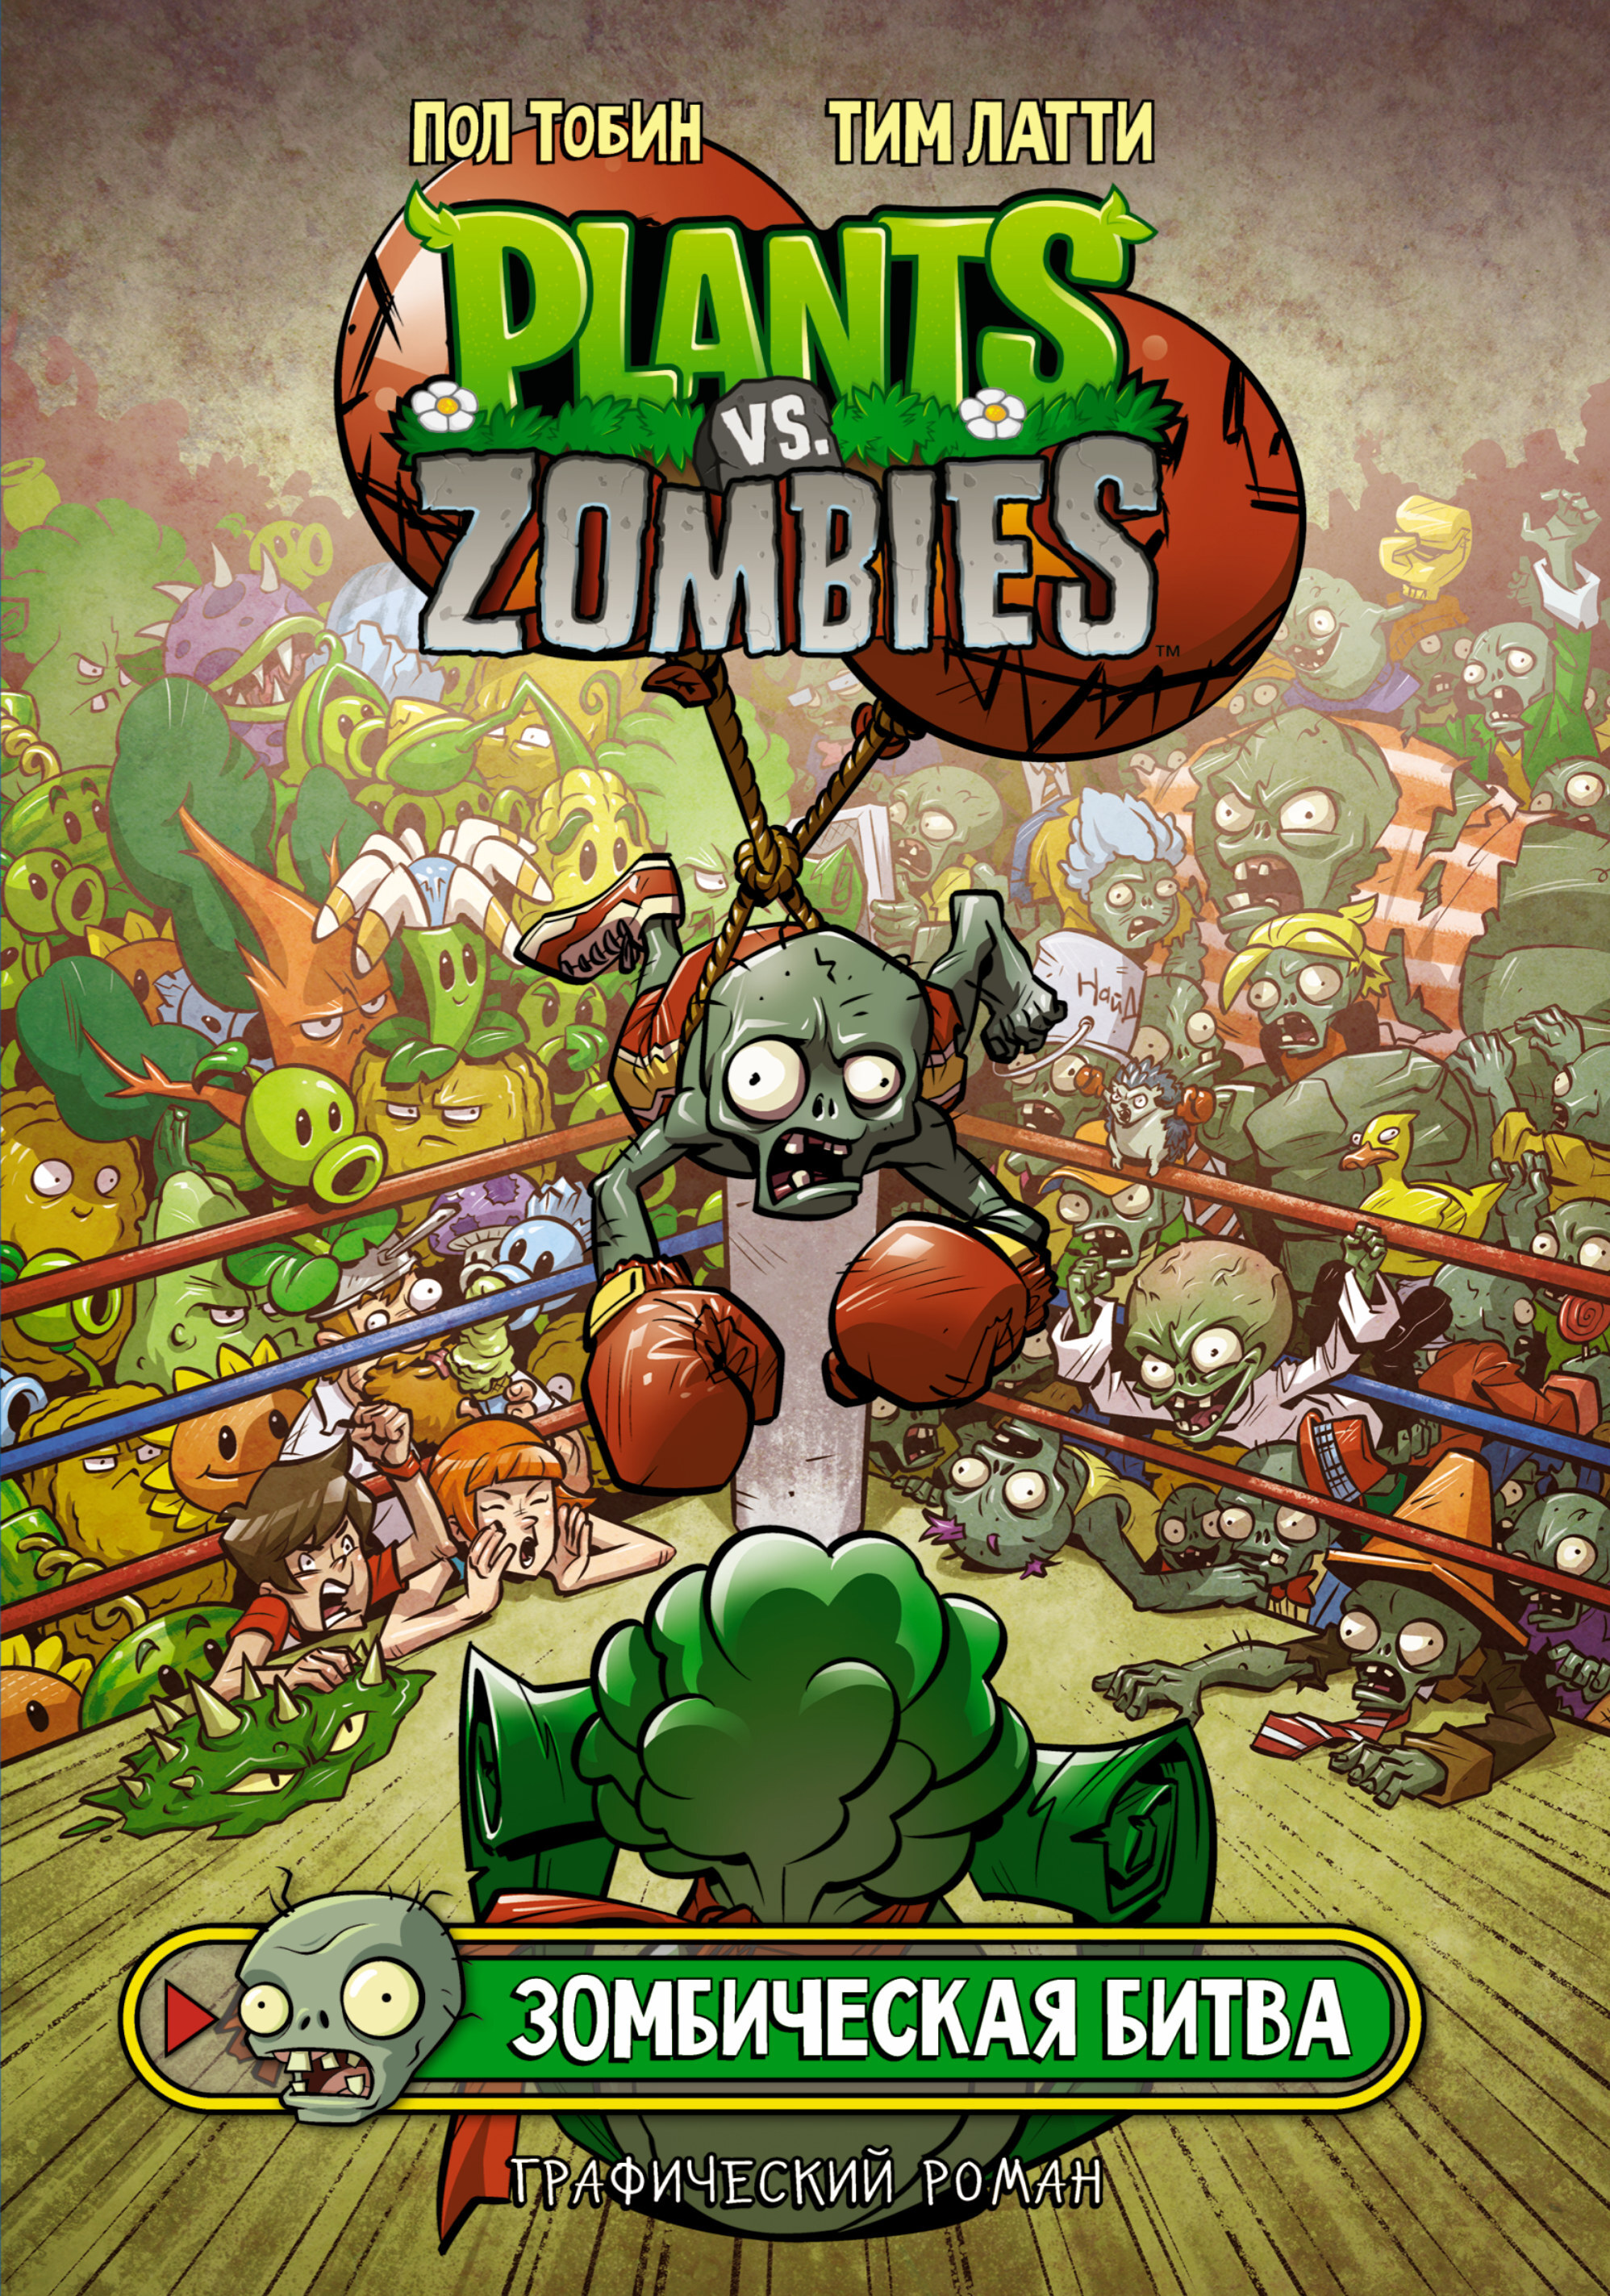 Plants vs zombies game of the year edition steam фото 69